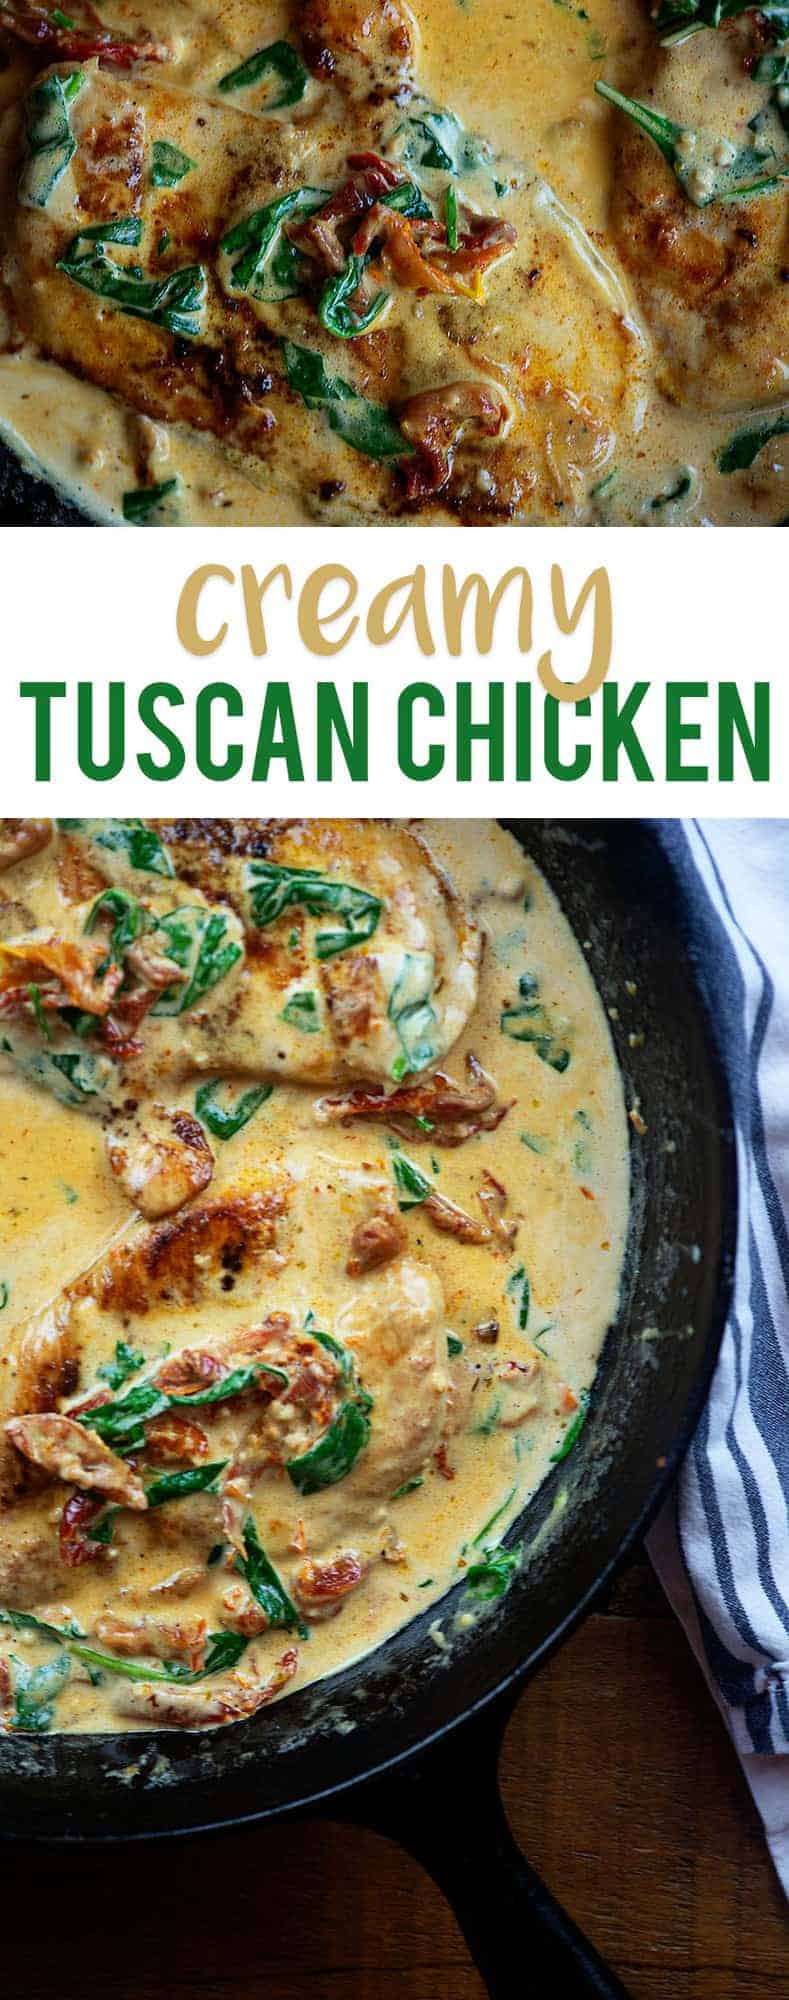 cast iron skillet with cooked creamy tuscan chicken